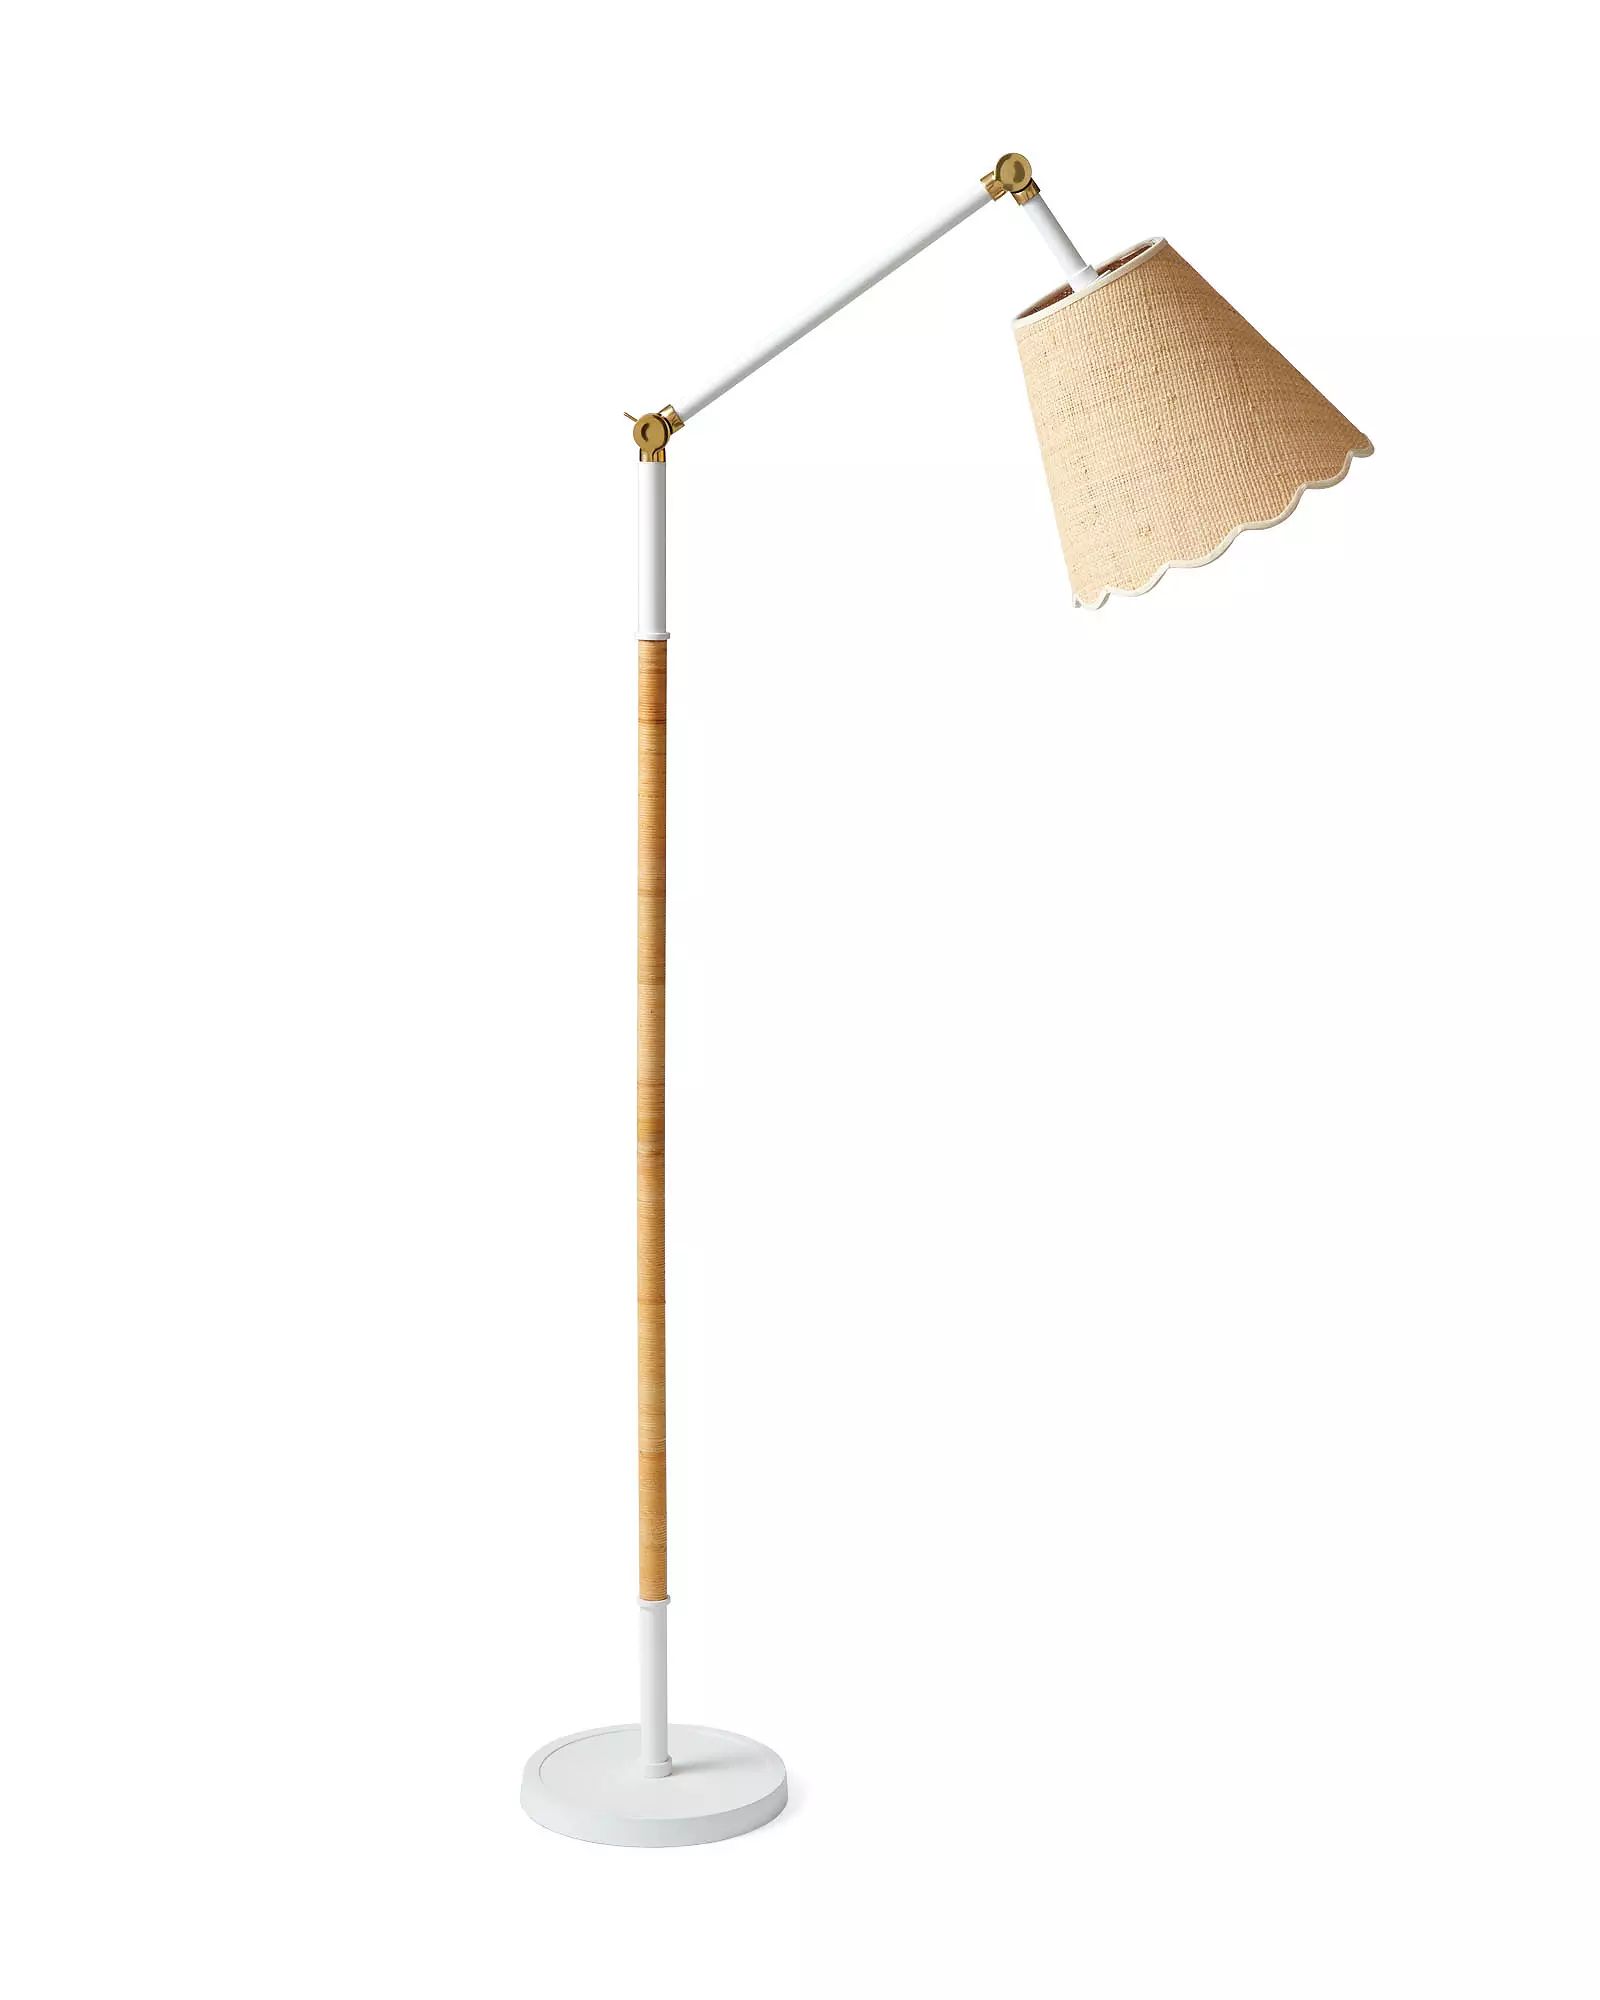 Larkspur Floor Lamp | Serena and Lily